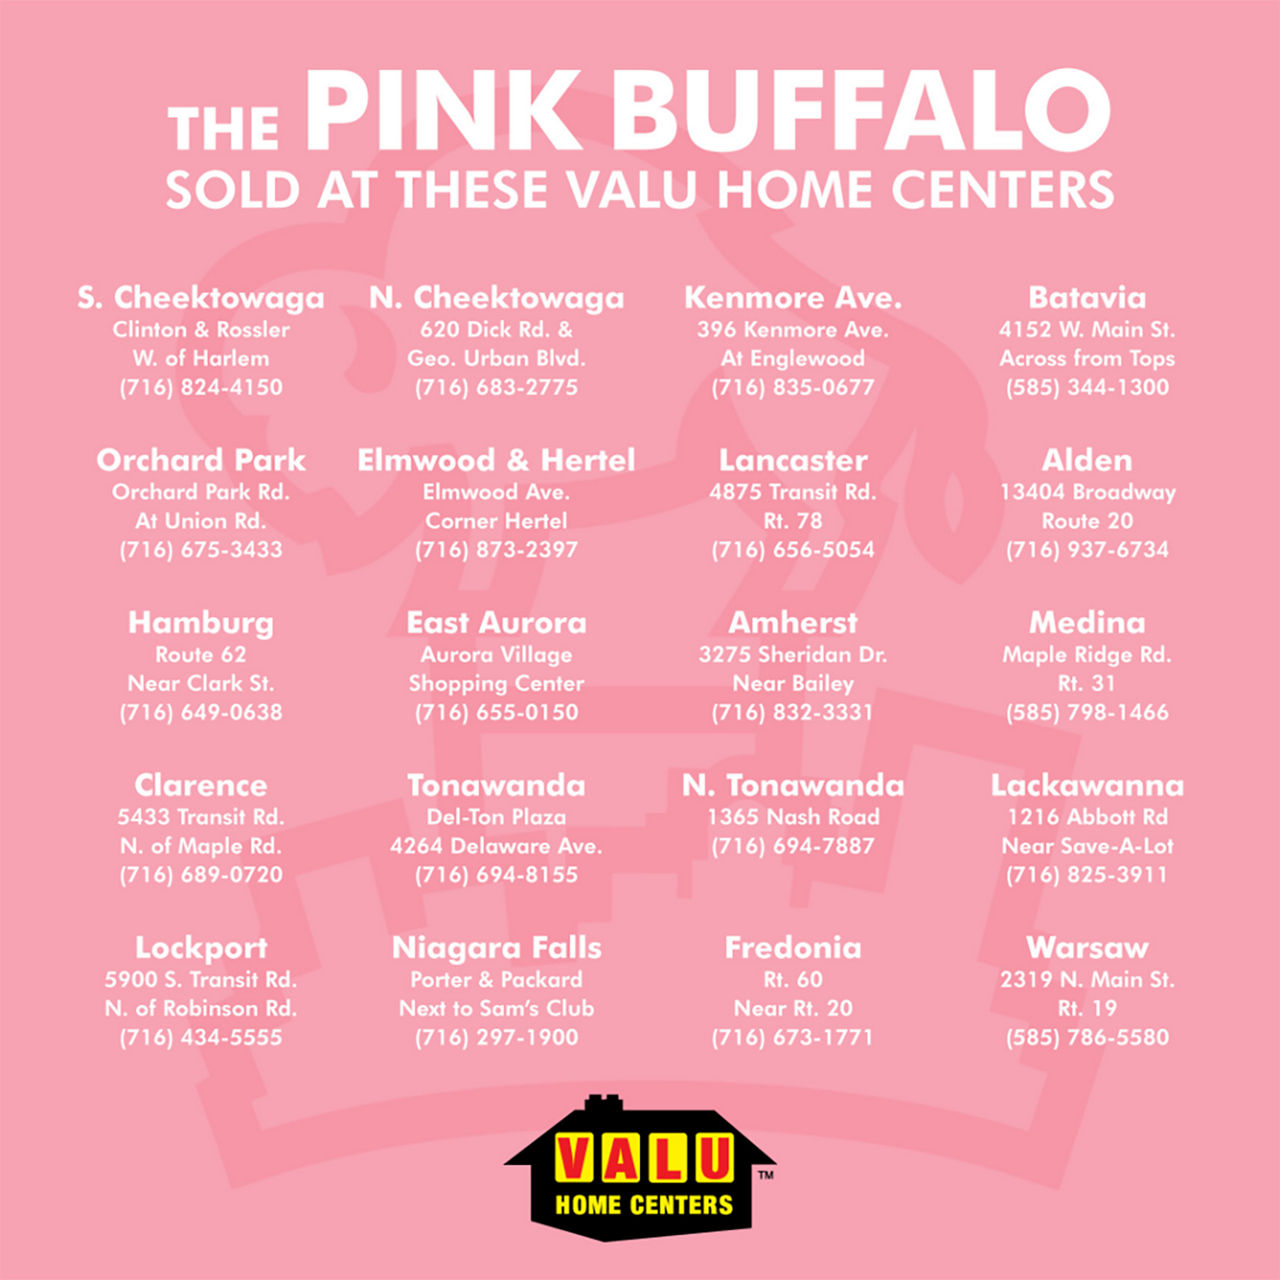 Image of where the pink buffalo is sold in stores